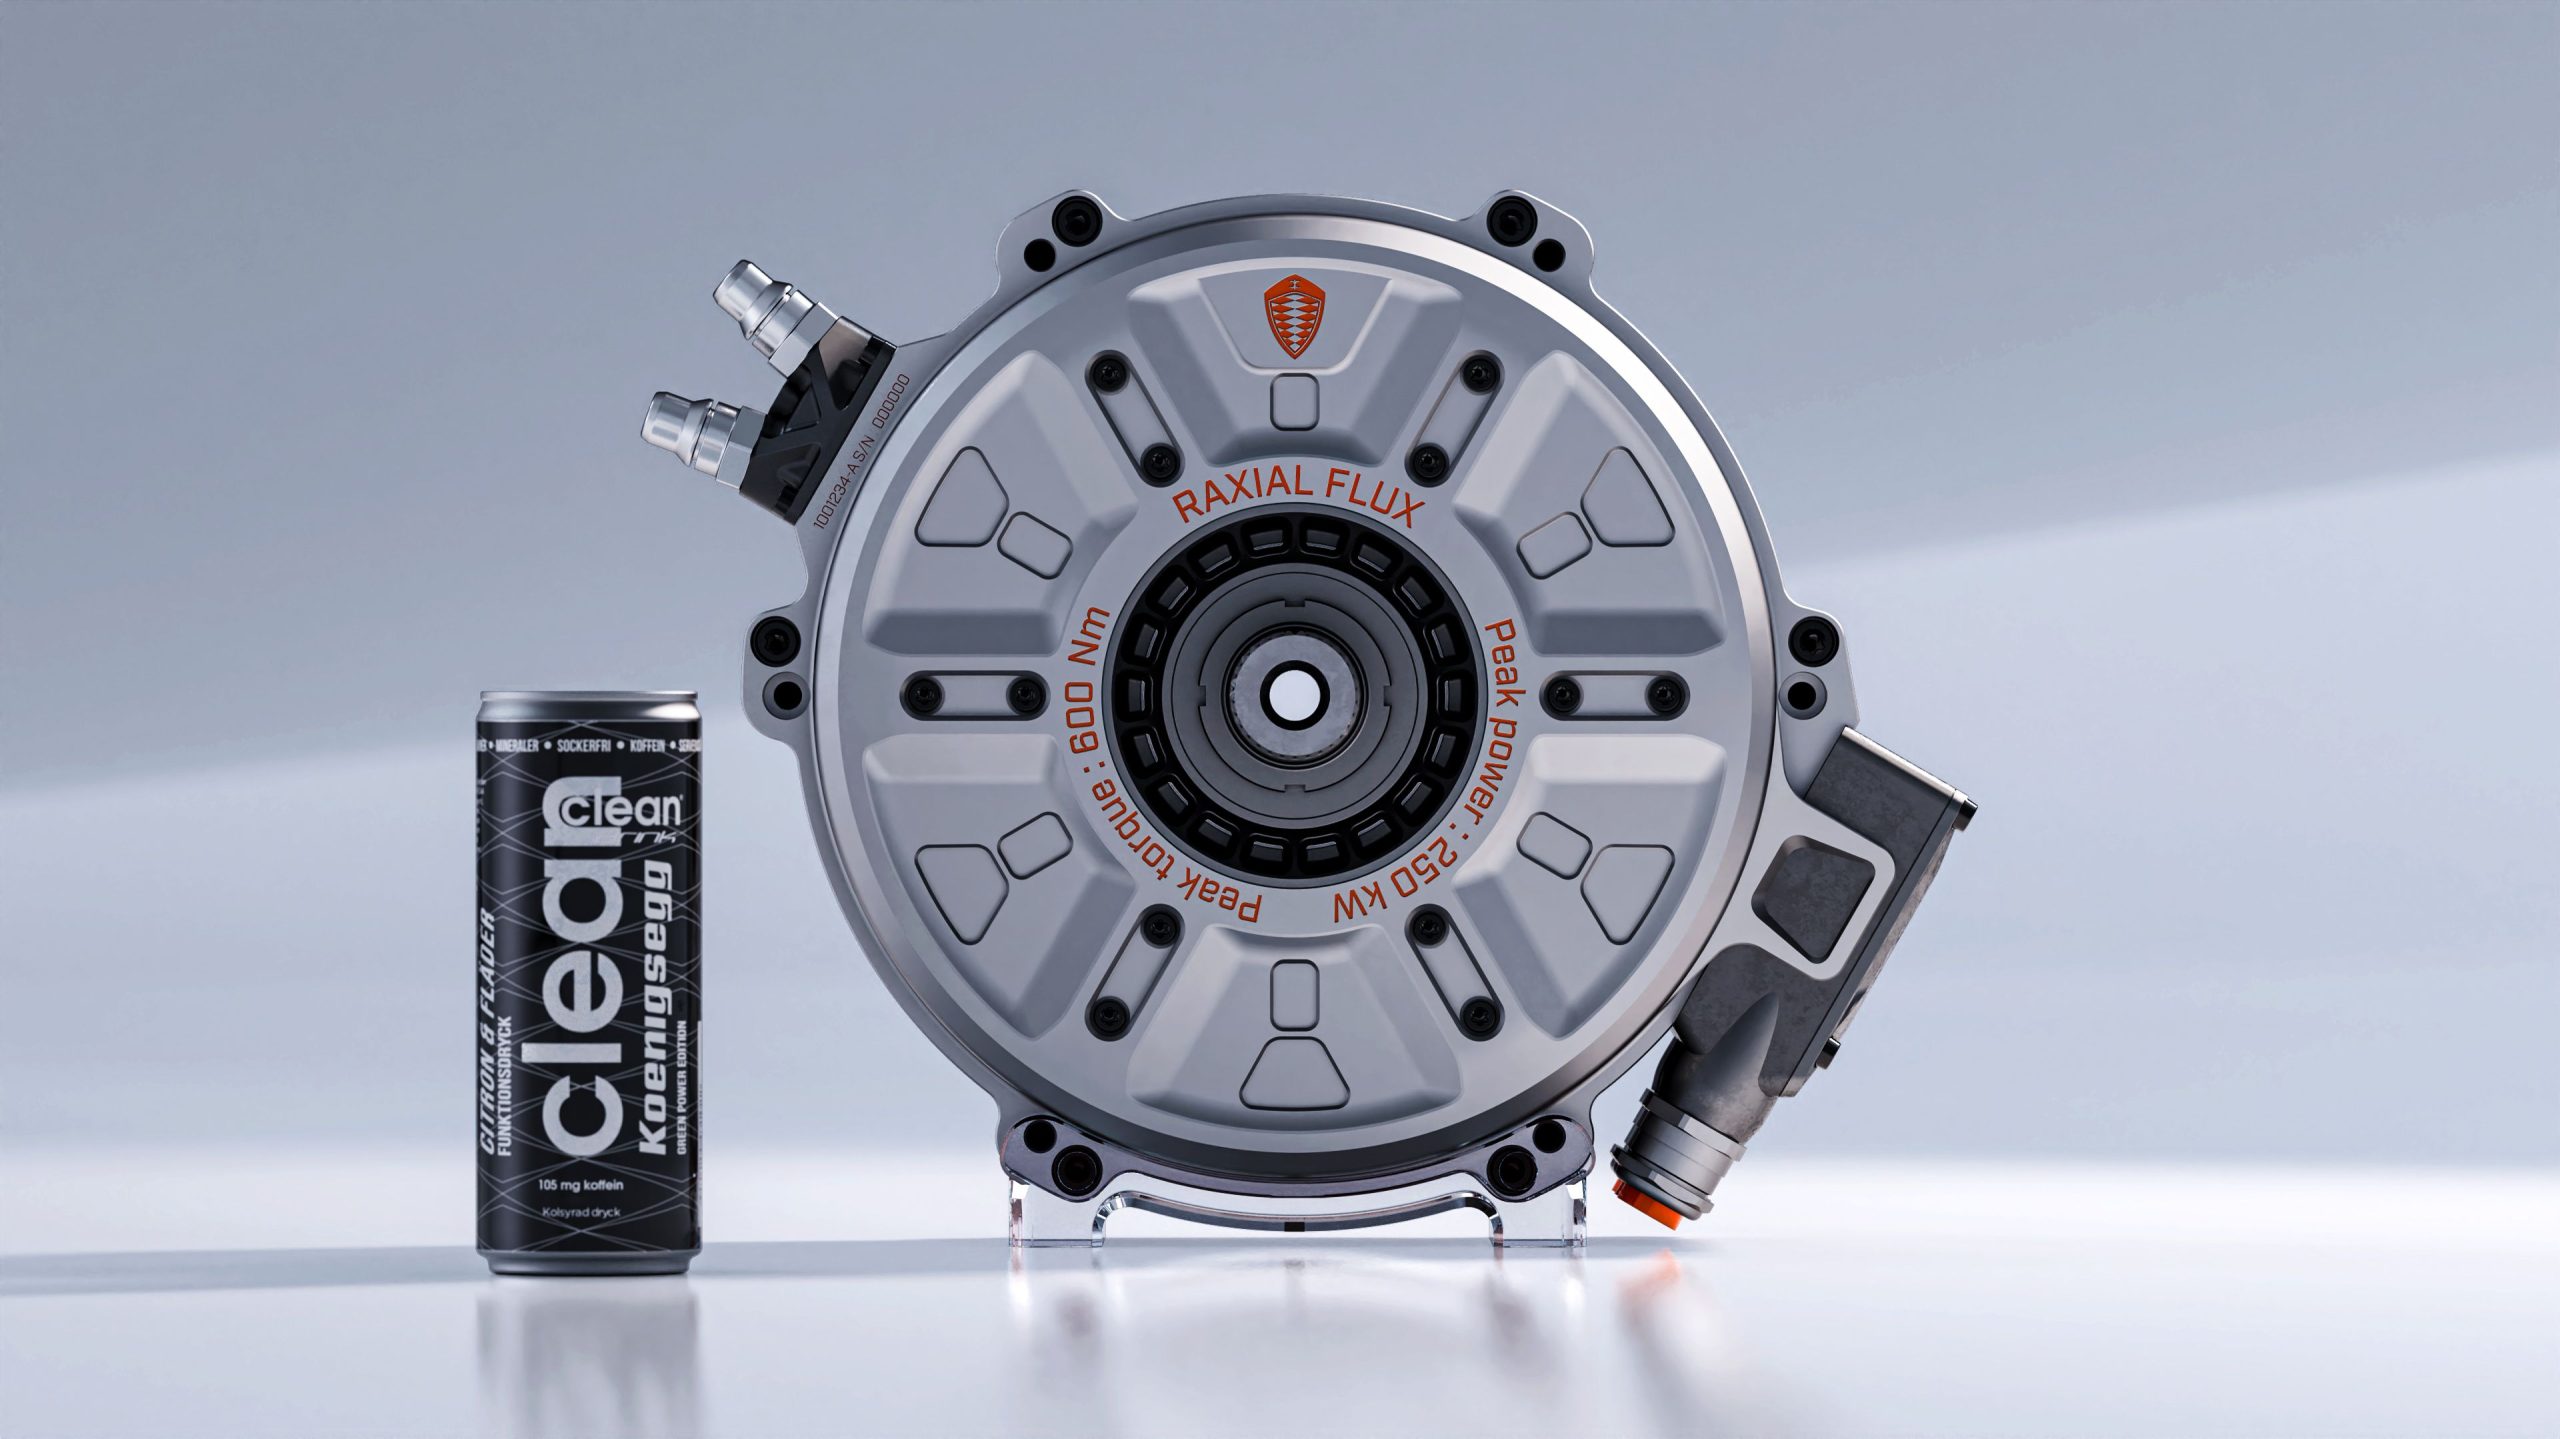 Image showing the 63-pound Koenigsegg Quark electric motor compared to an energy drink can